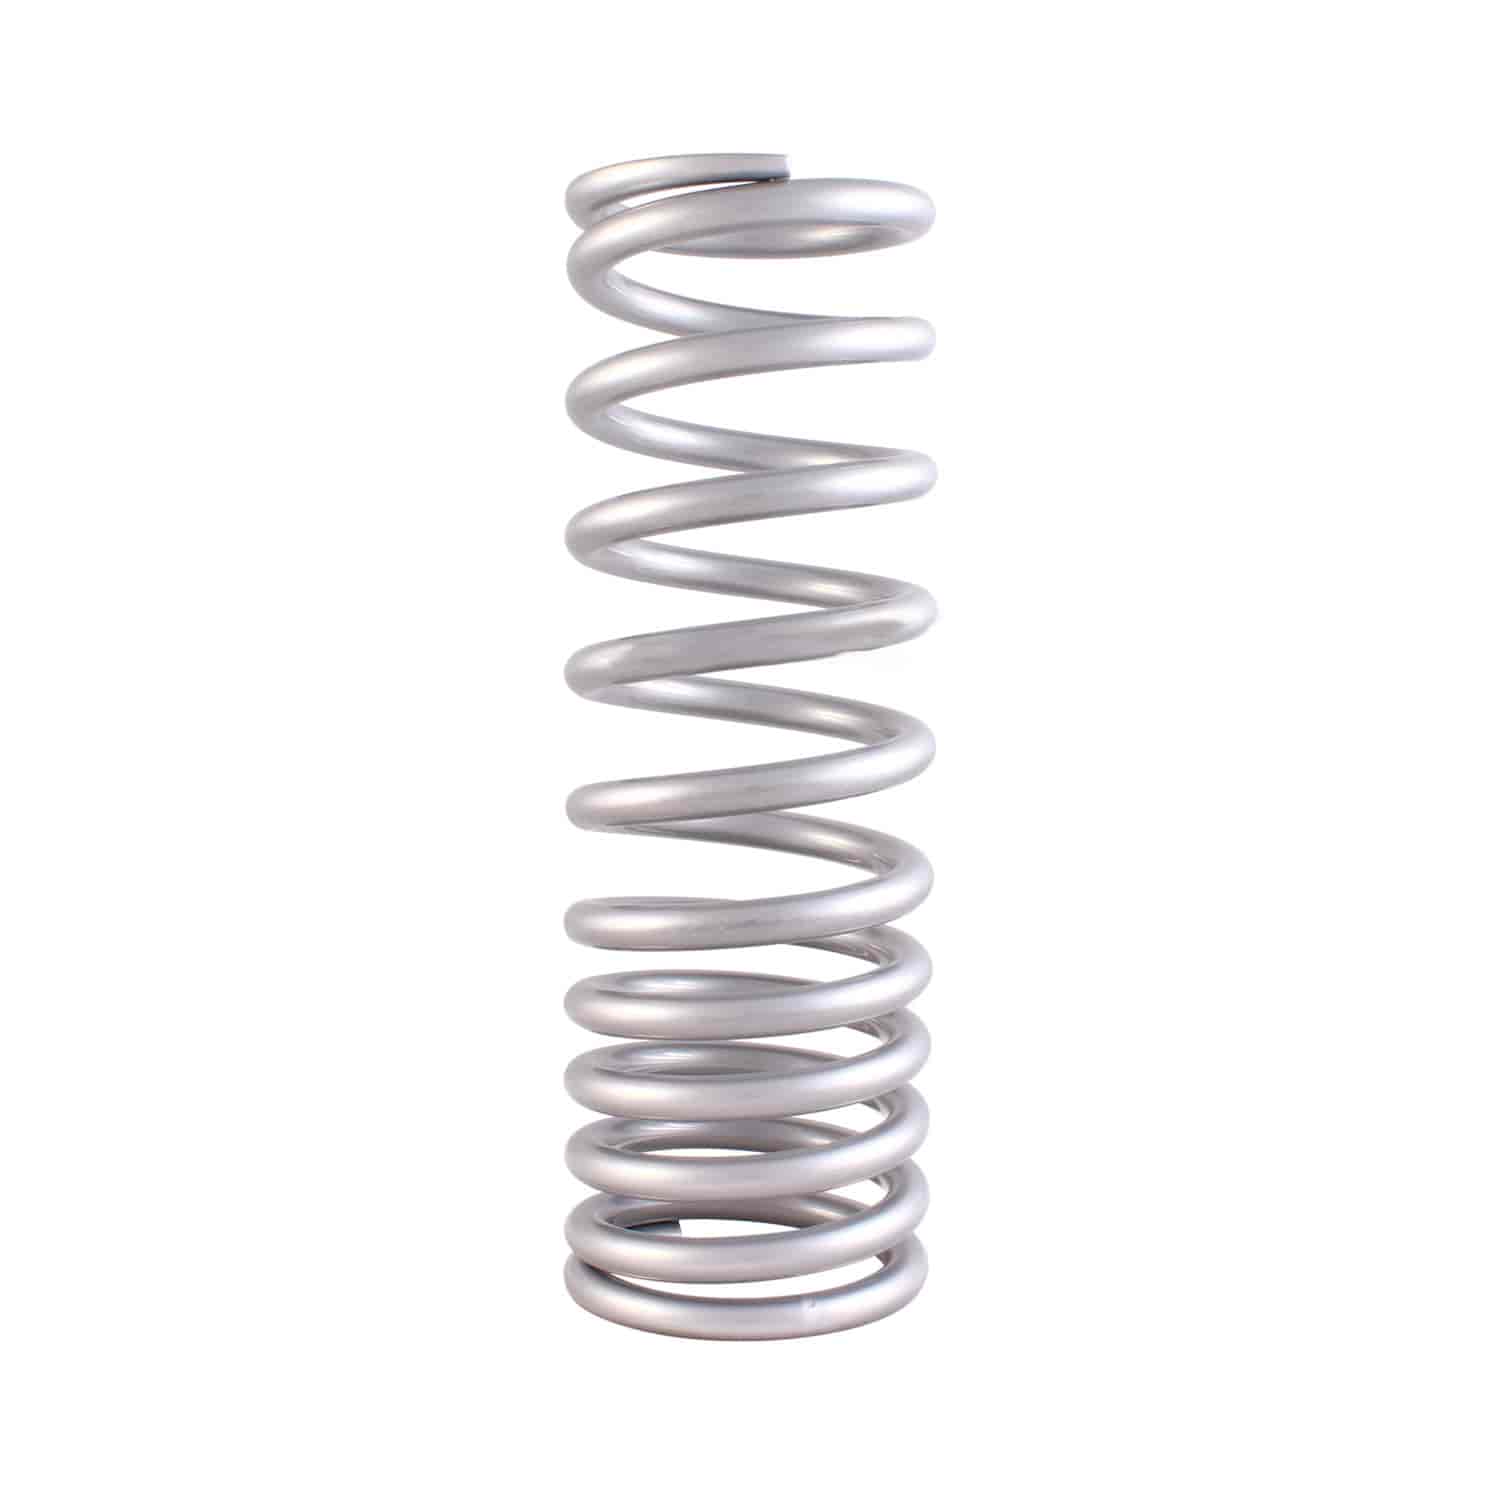 Silver Powder-coated 10 in. High Travel Coil Spring